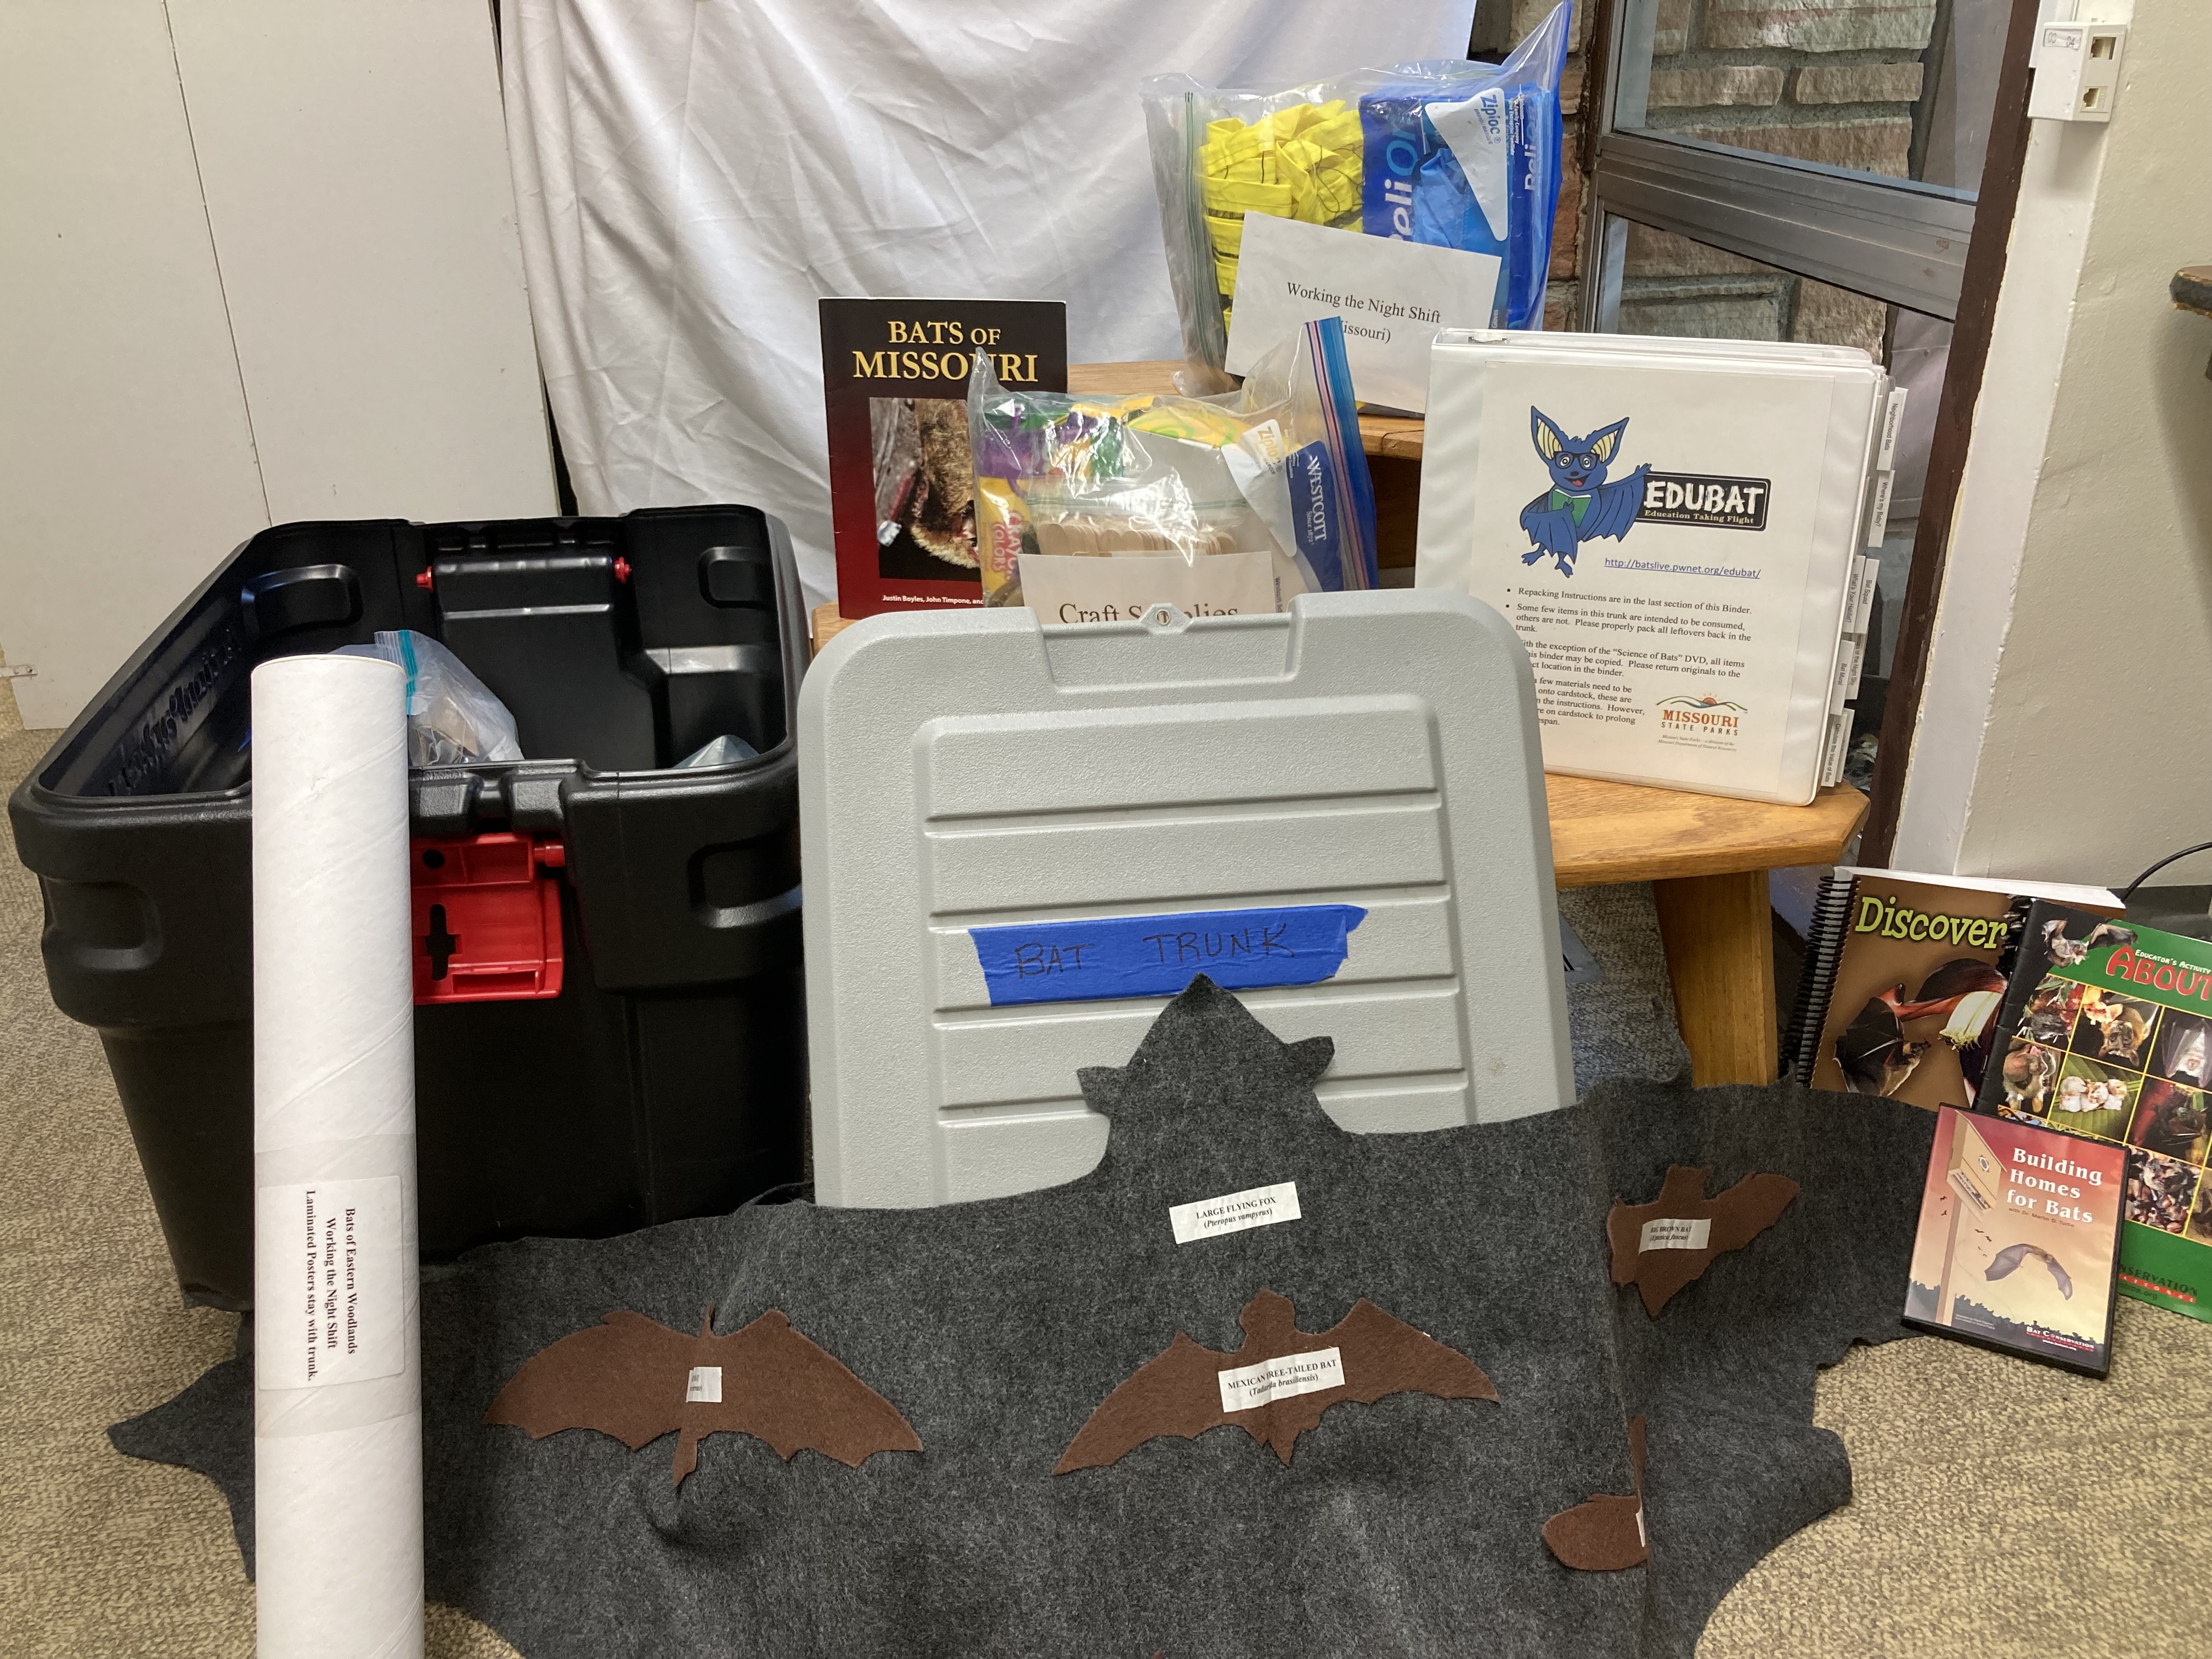 Educational trunk items, including books, a rolled-up poster and a paper cutout of a bat